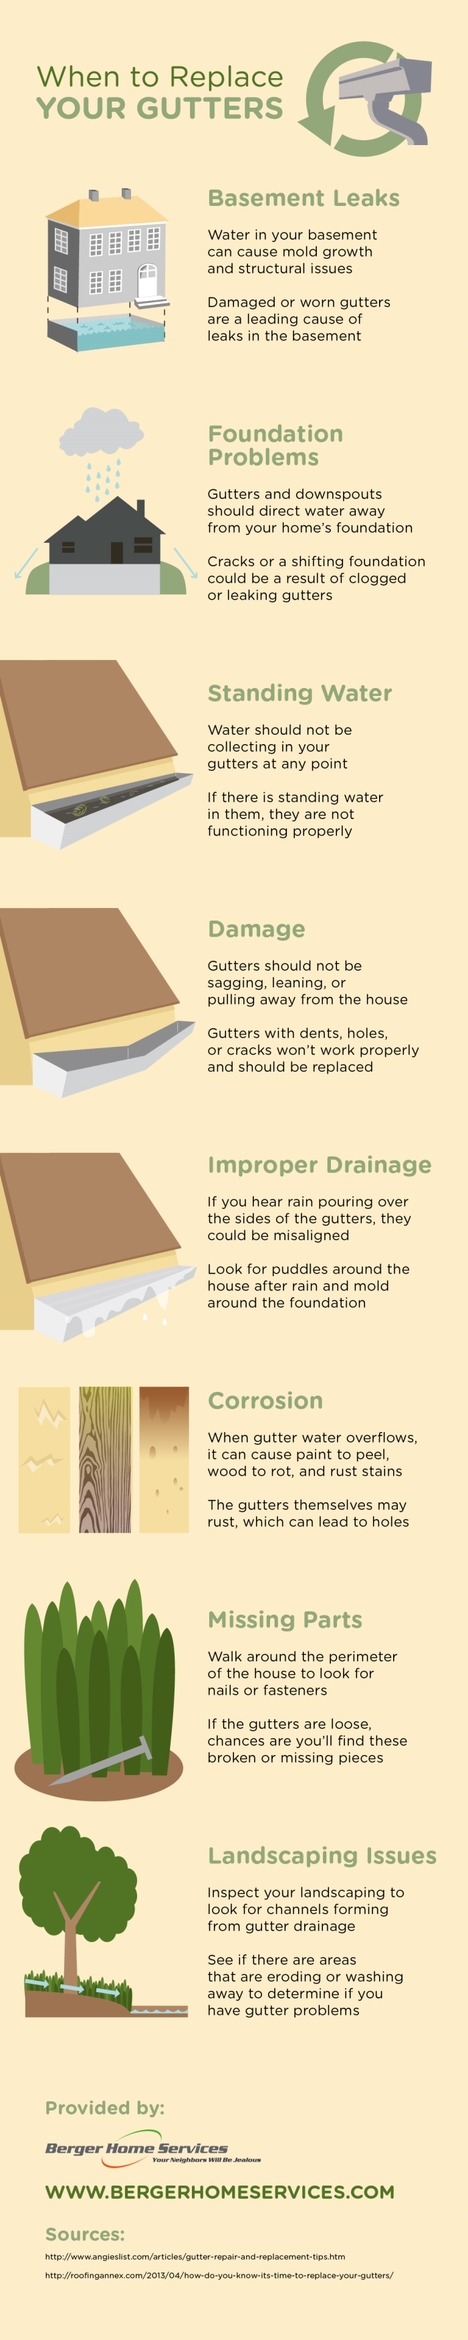 When to Replace Your Gutters